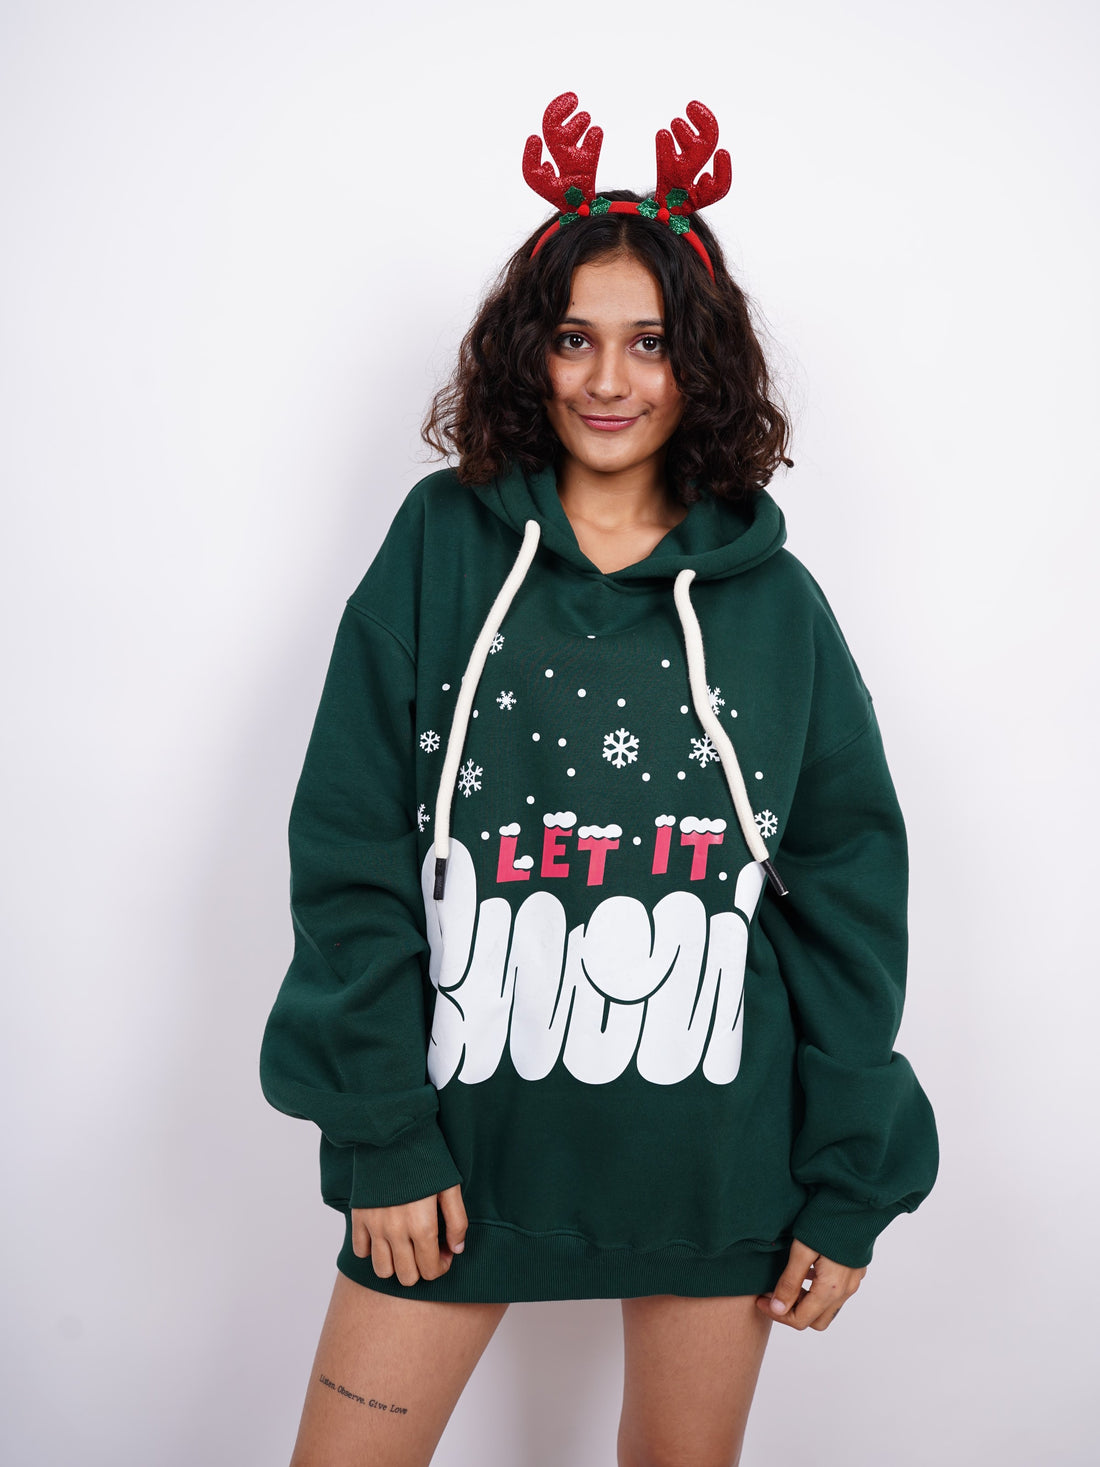 Let It Snow Heavyweight Baggy Hoodie For Men and Women